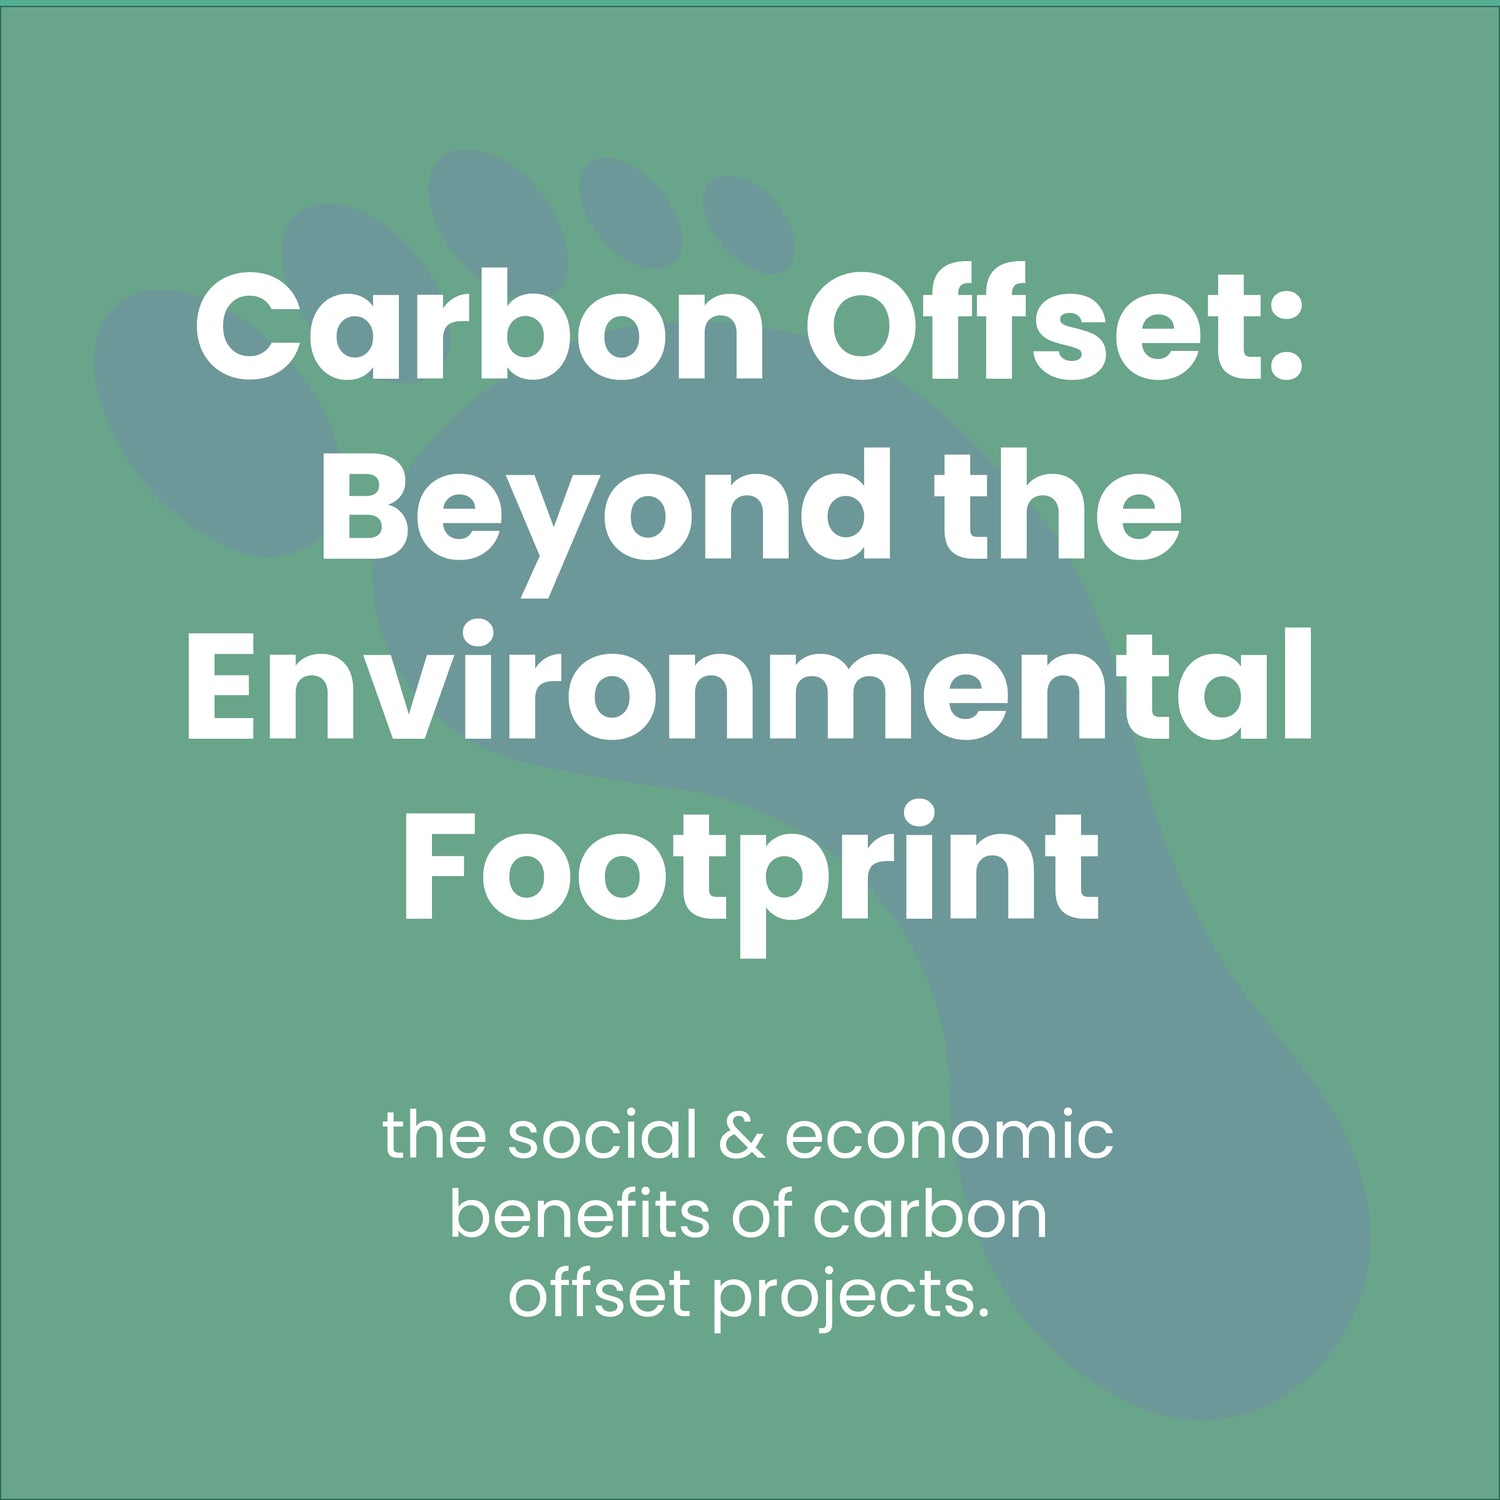 What is Carbon Offset?